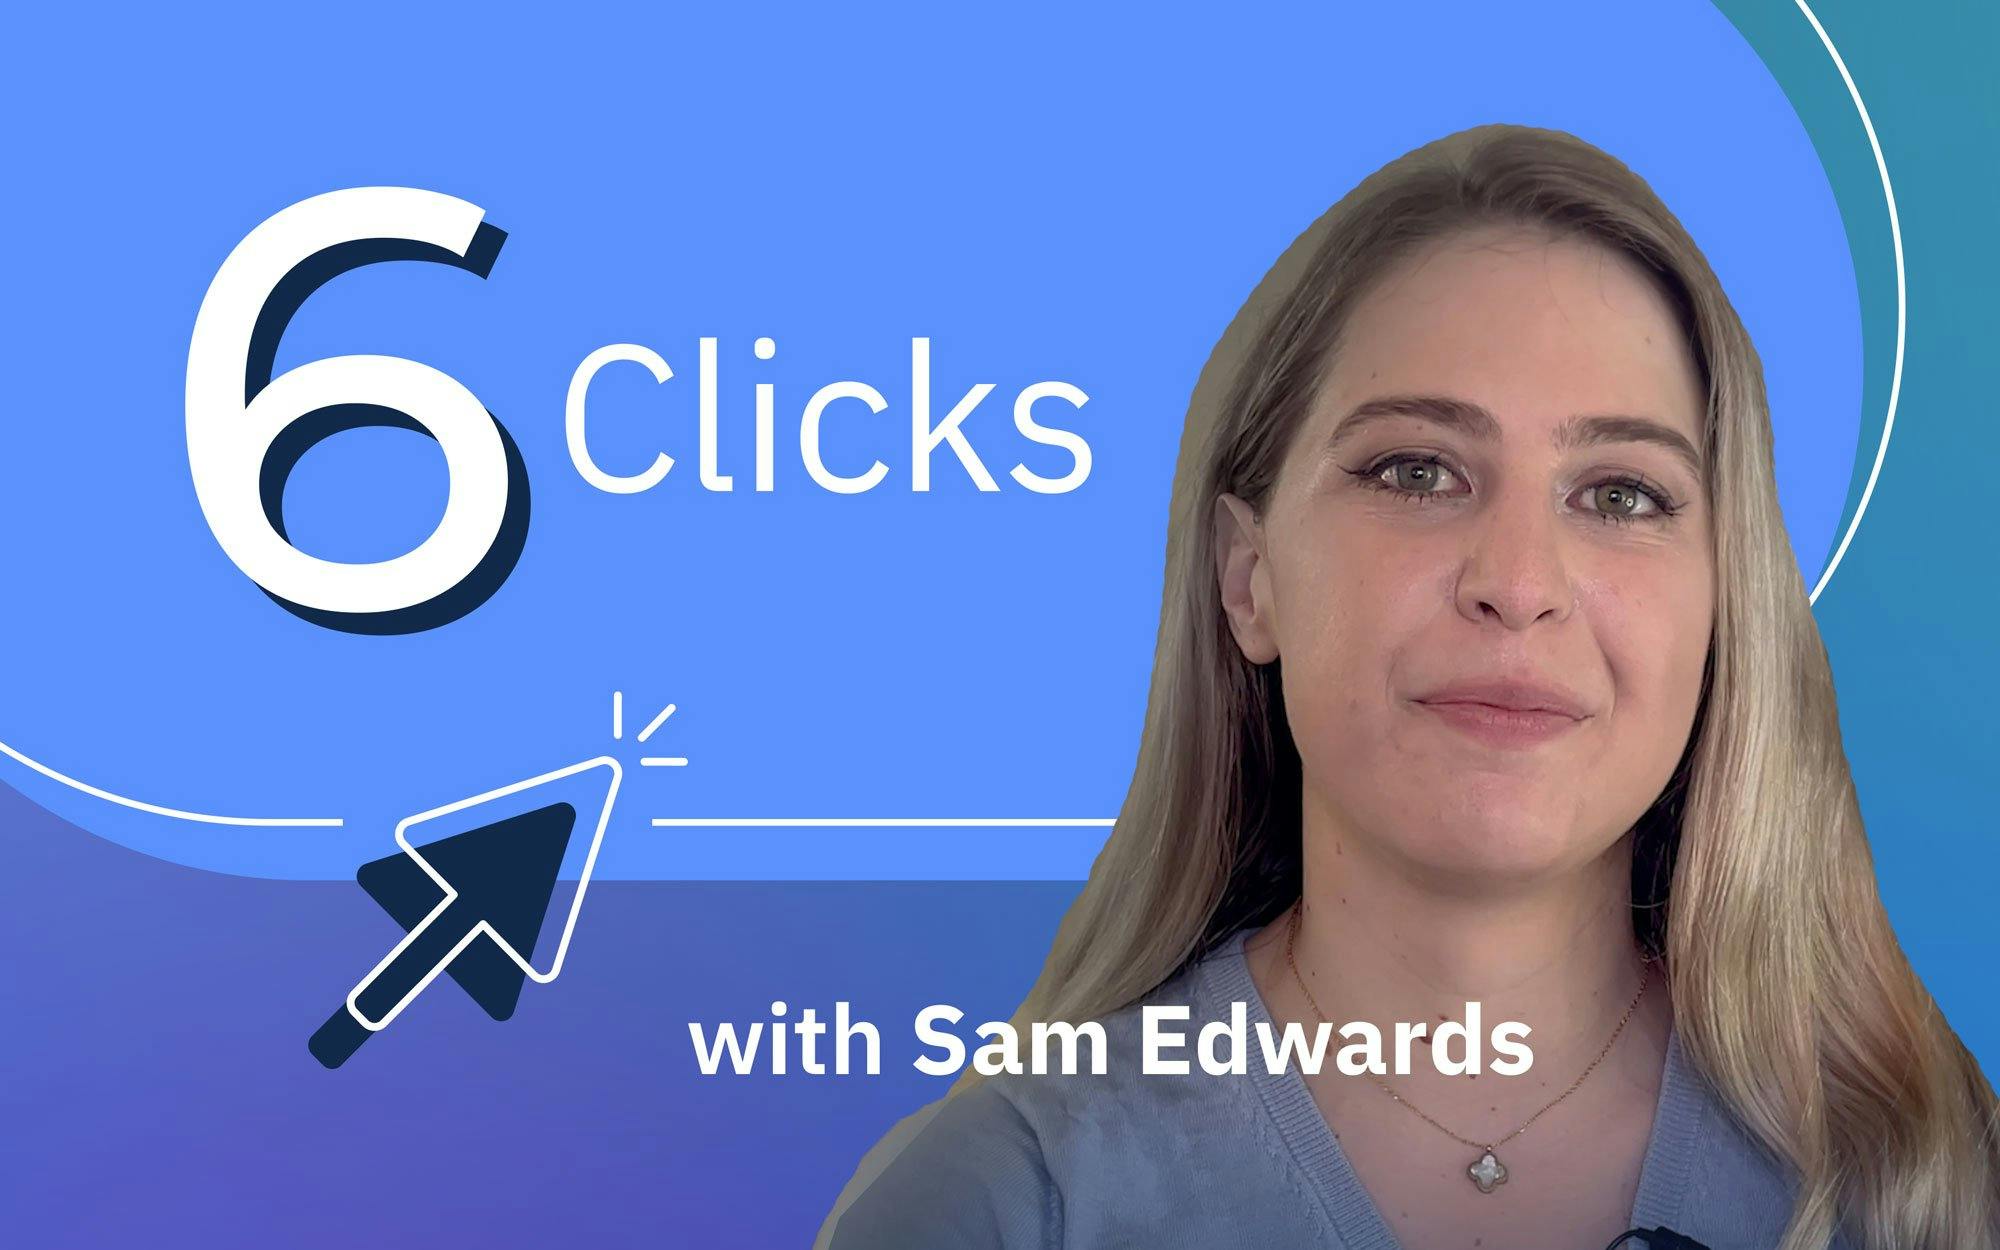 A thumbnail image from 6 Clicks video about increasing shopping cart values